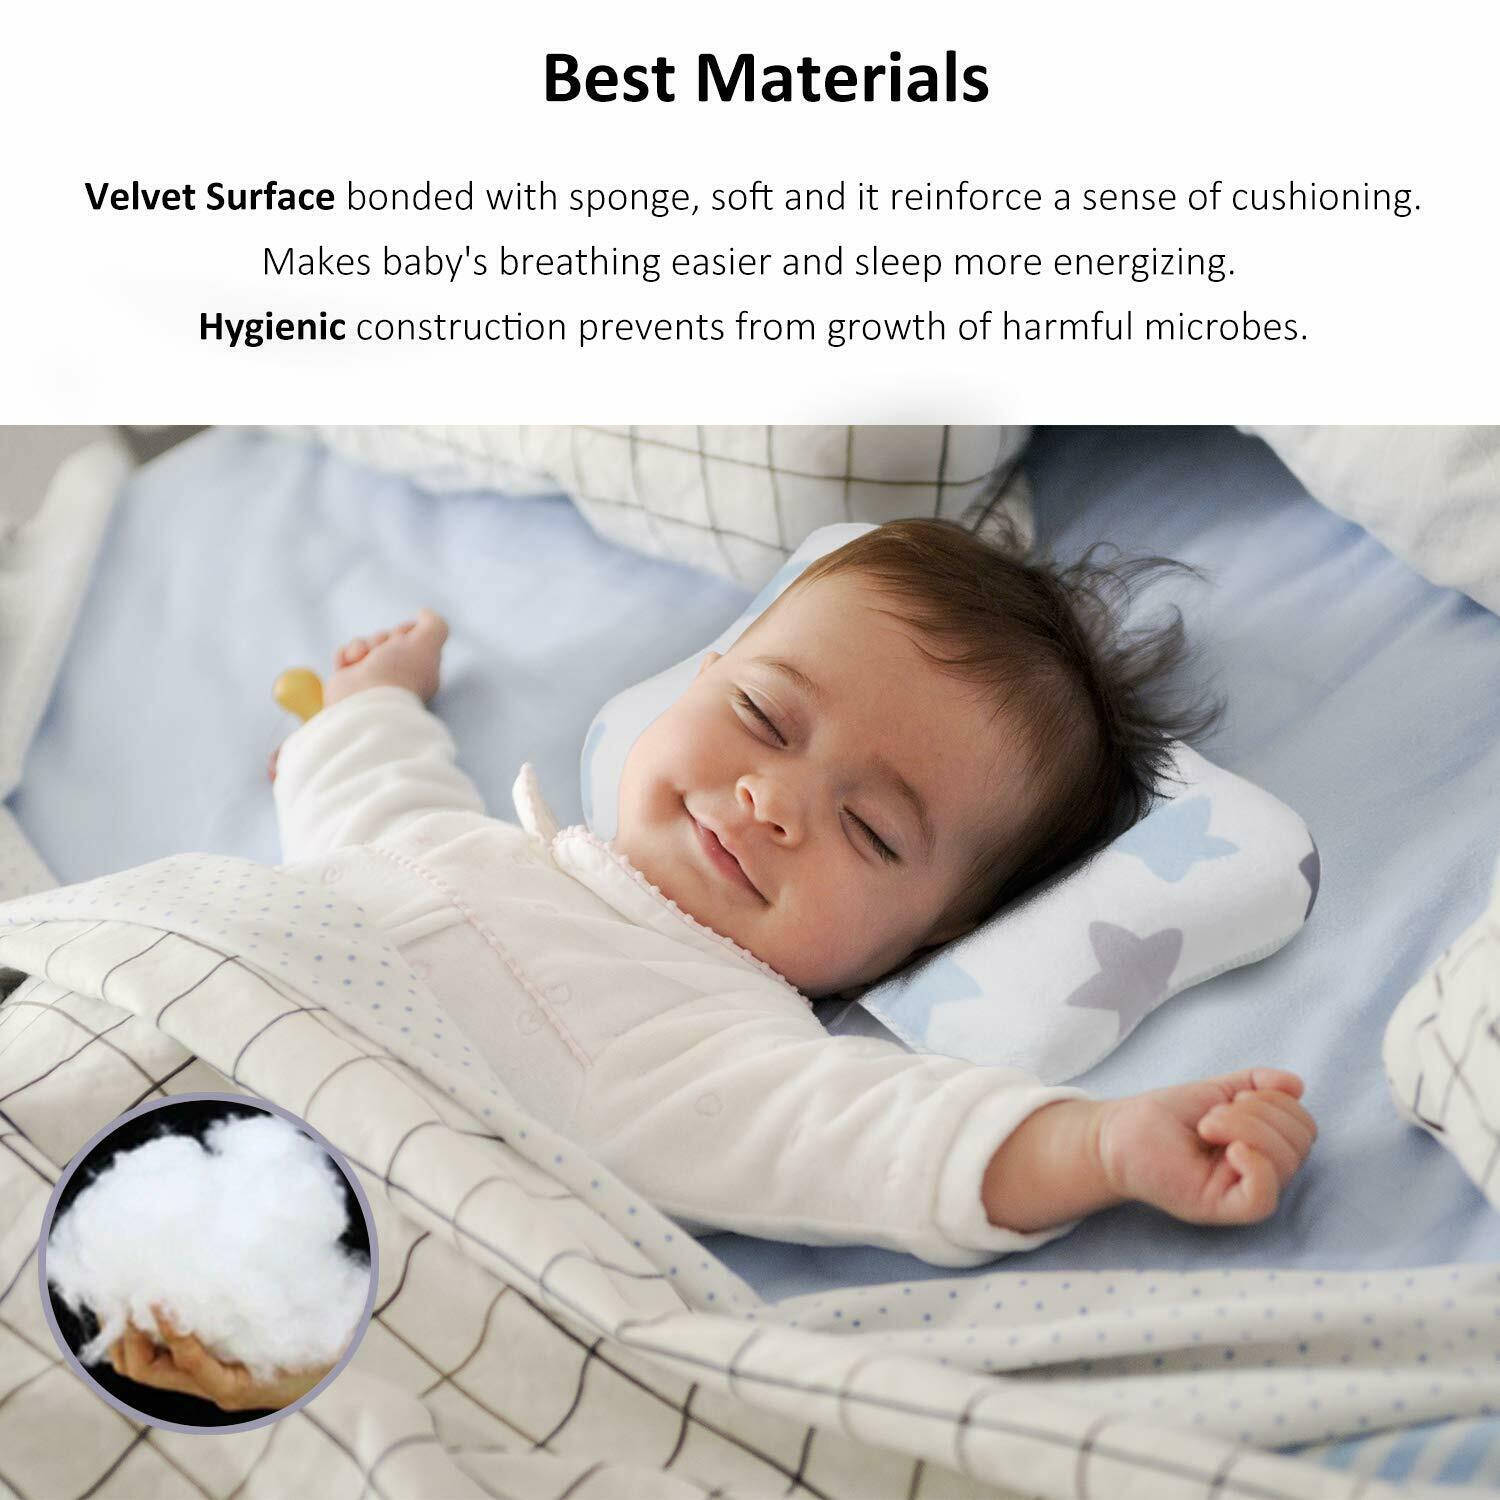 Cotton Baby Infant Newborn Pillow Flat Head Sleeping Position Prevent Breathable 